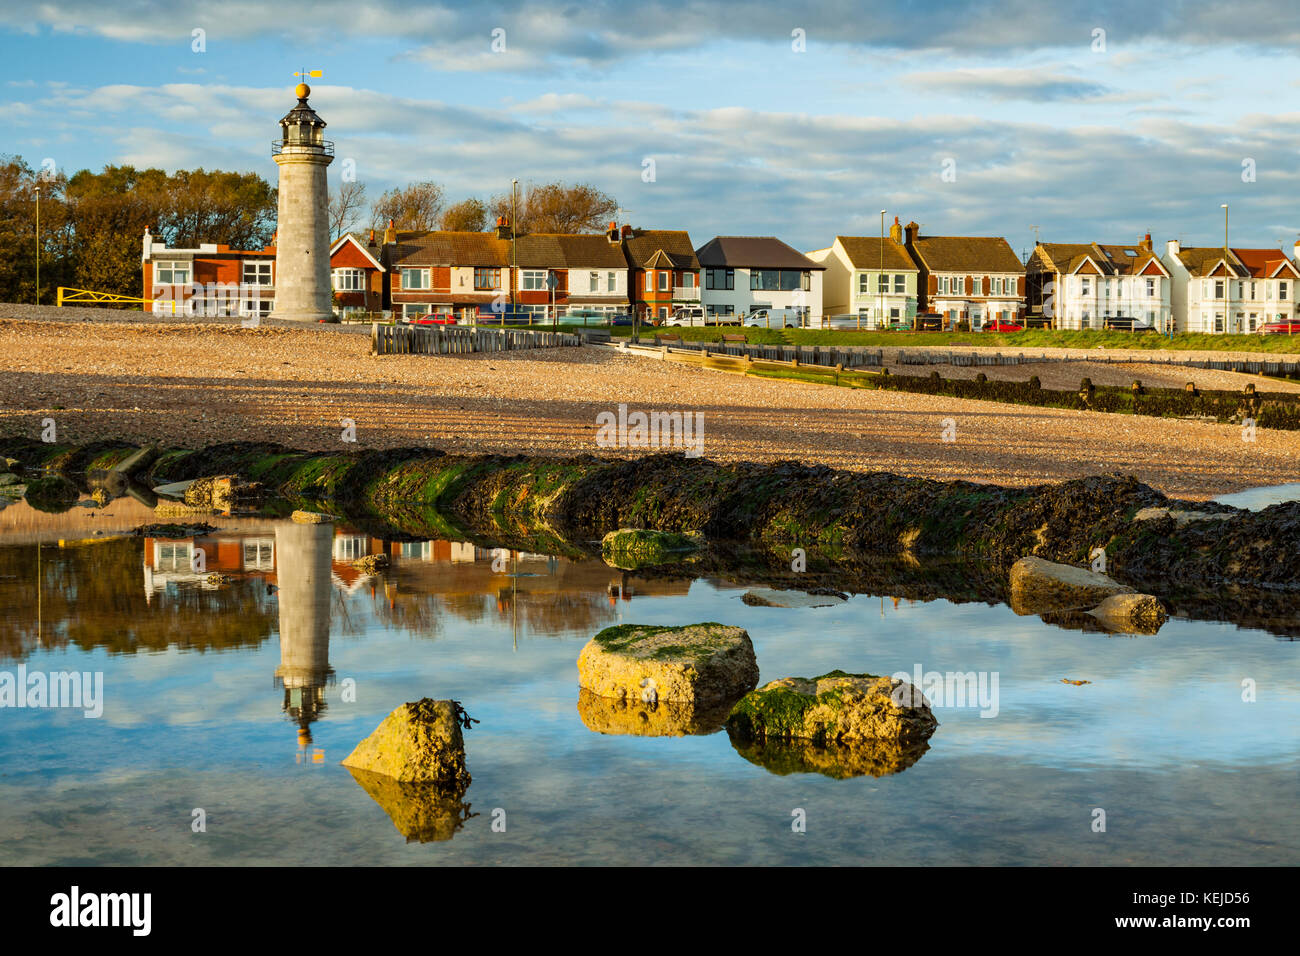 Autumn afternoon in Shoreham-by-Sea, West Sussex, England. Stock Photo